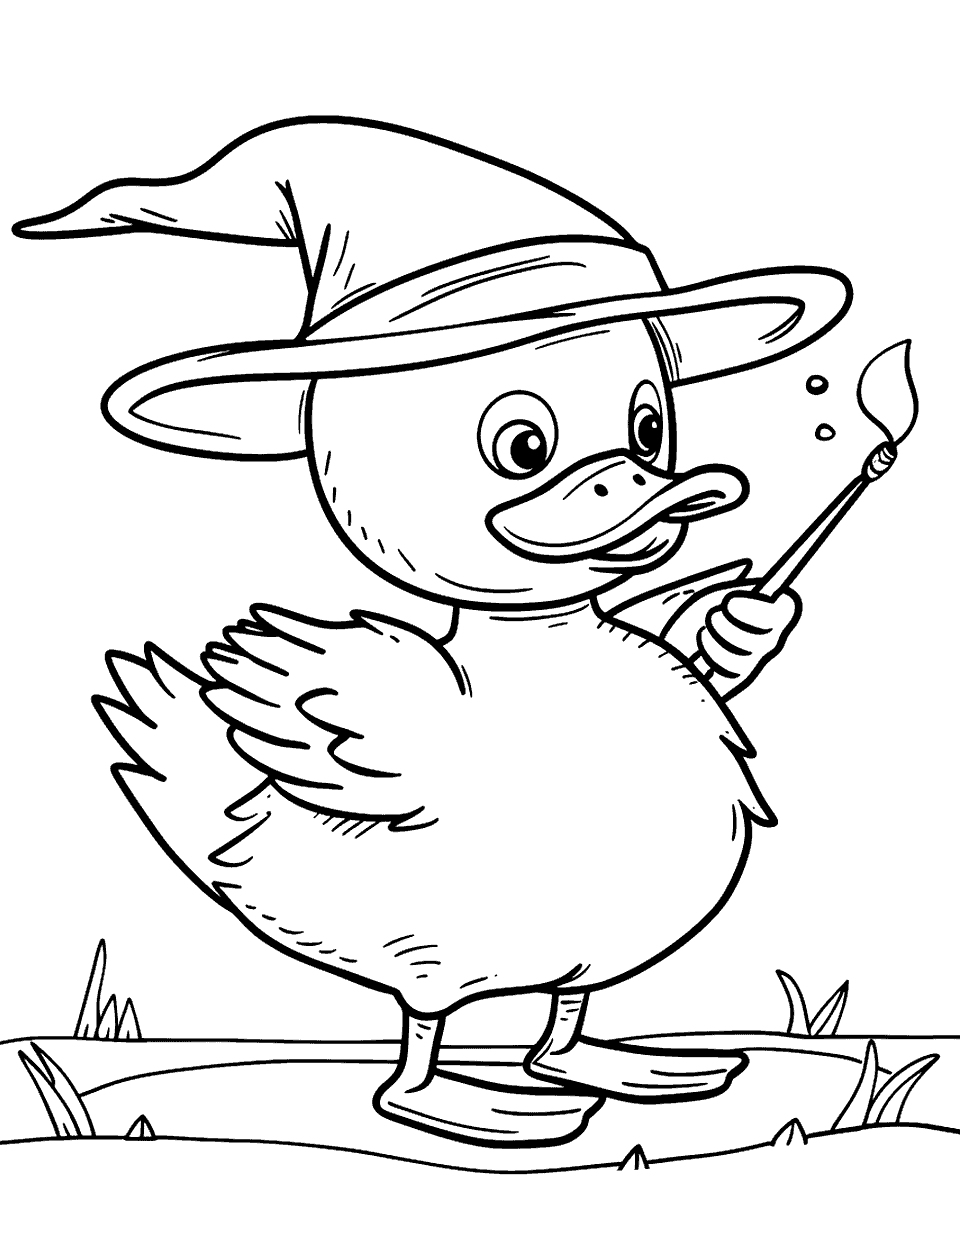 Duck in a Wizard Hat Coloring Page - A duck dressed as a wizard casting a spell with a magic wand.